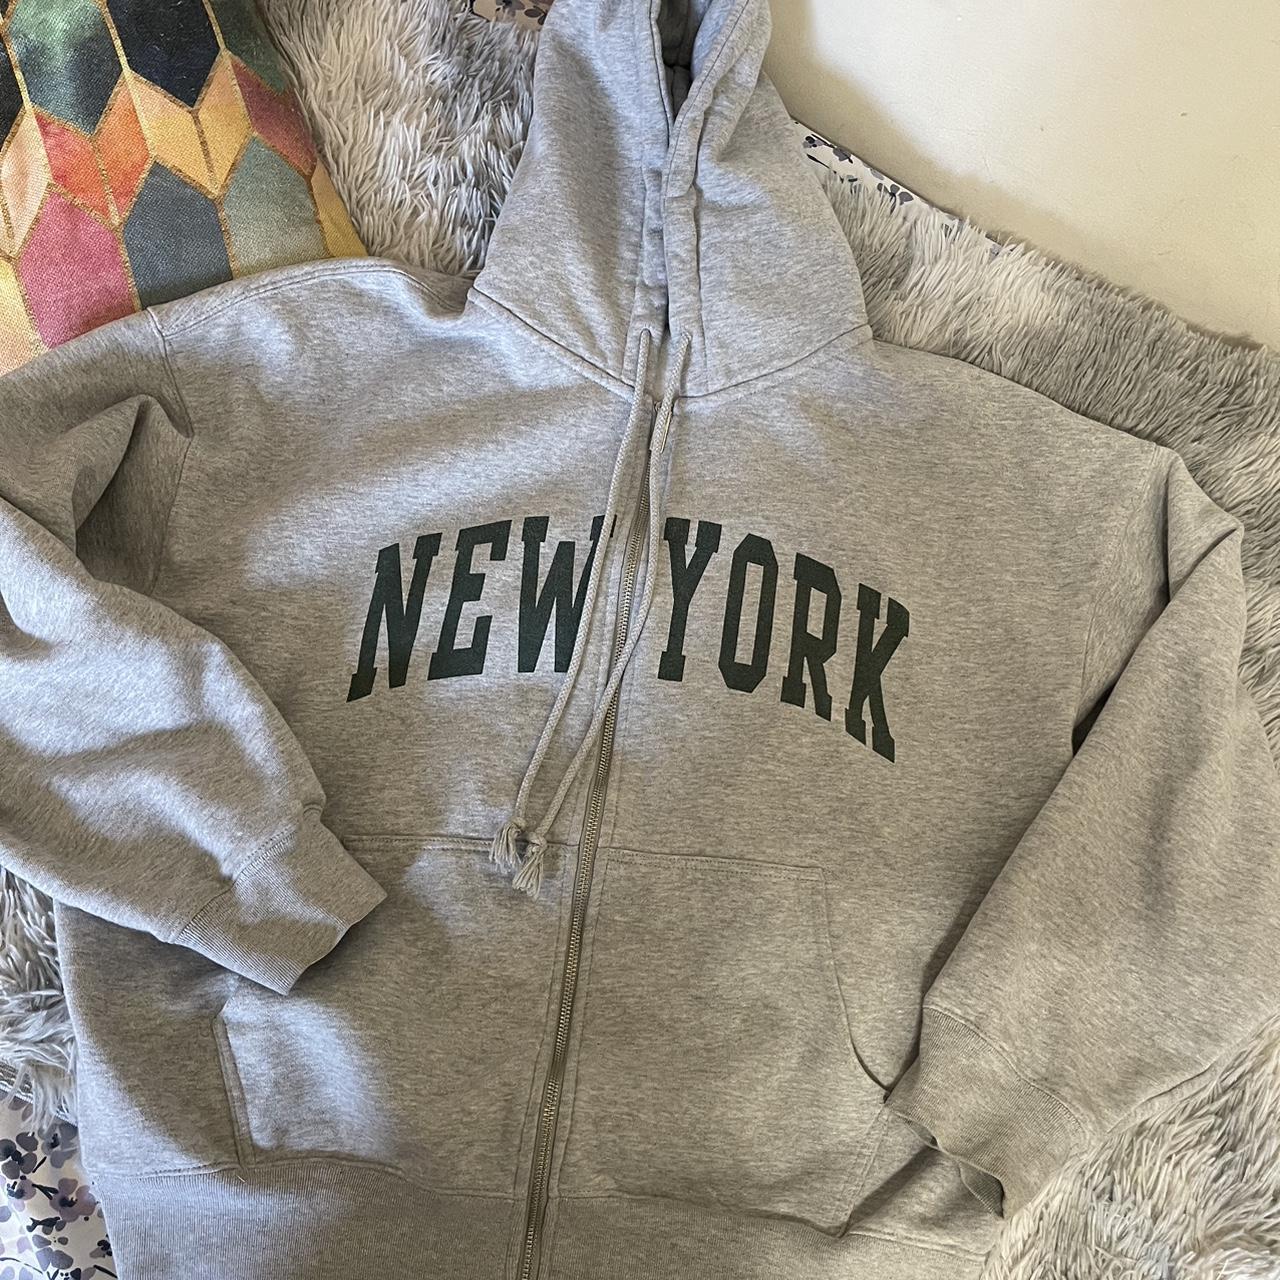 i bought a brandy melville christy hoodie from depop and it came with a  bleach stain😭 how do i get rid of it? (the seller said there were some  flaws but i